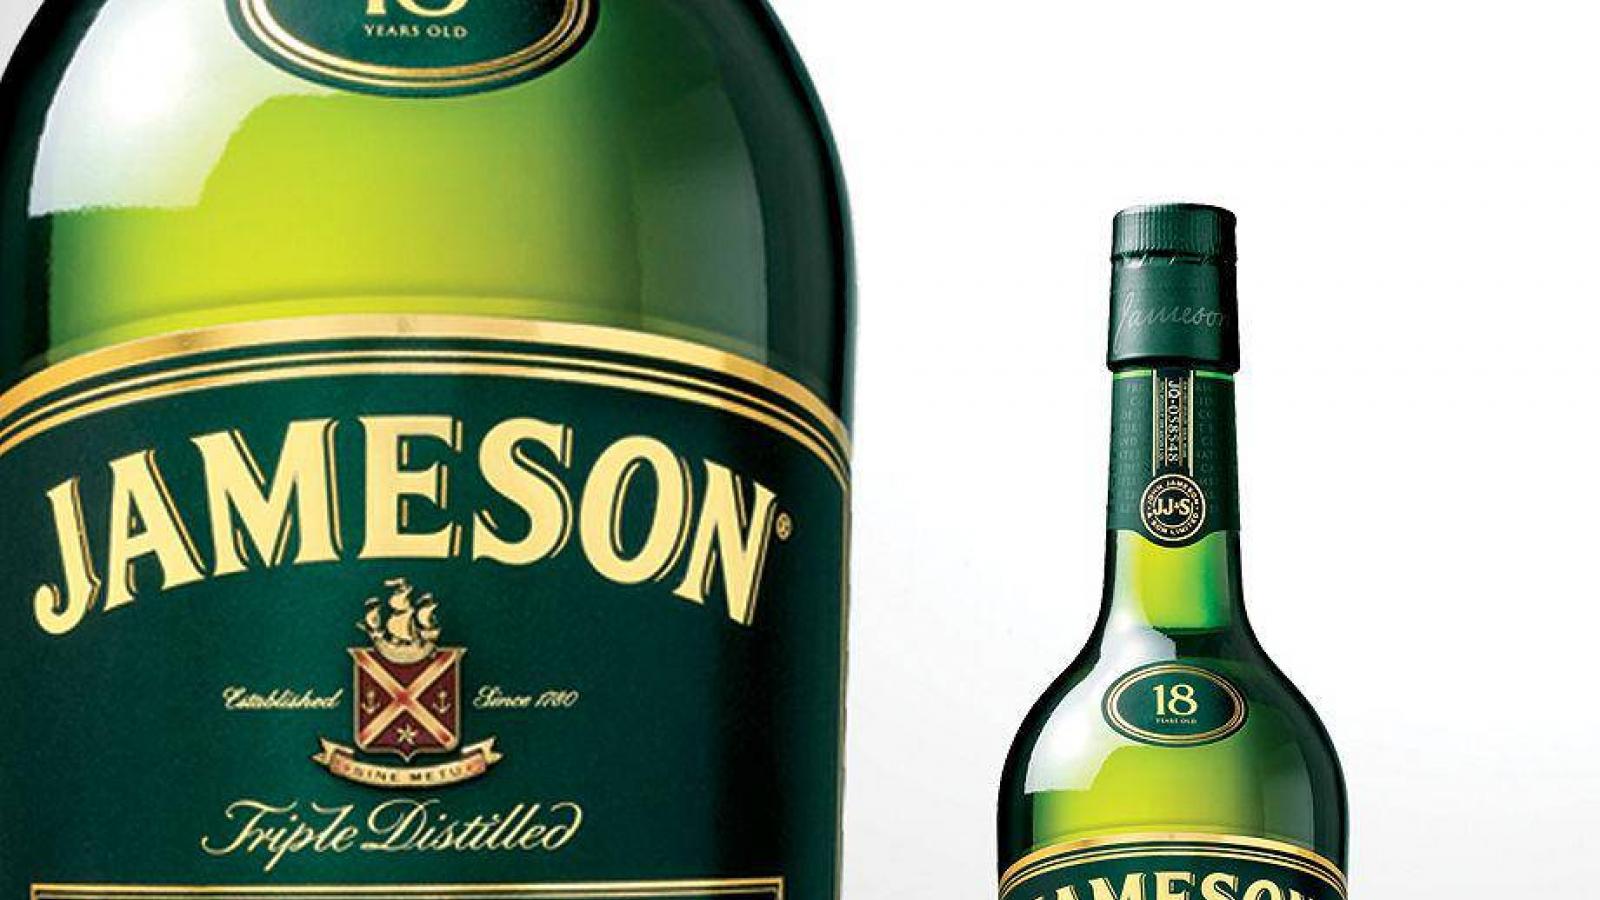 Jameson Wallpaper High Quality And Resolution